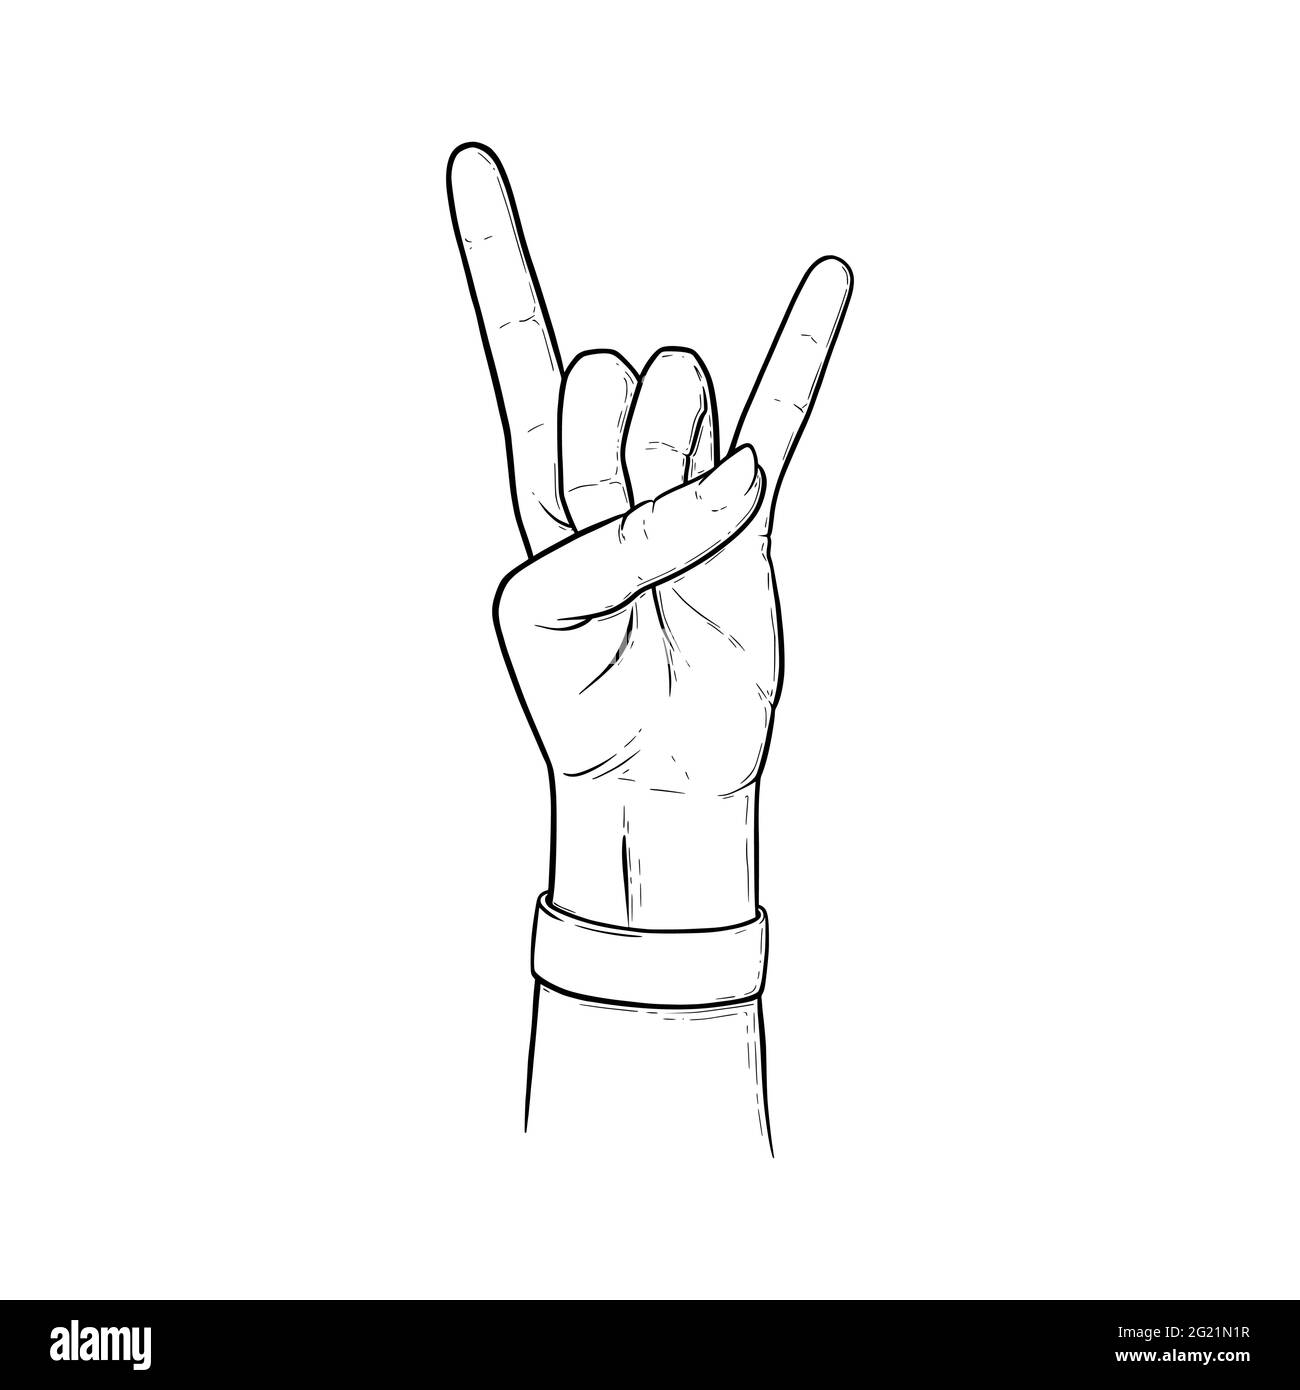 Rock sign with two fingers up. Heavy metal or rock hand gesture isolated in white background. Outline vector illustration Stock Vector